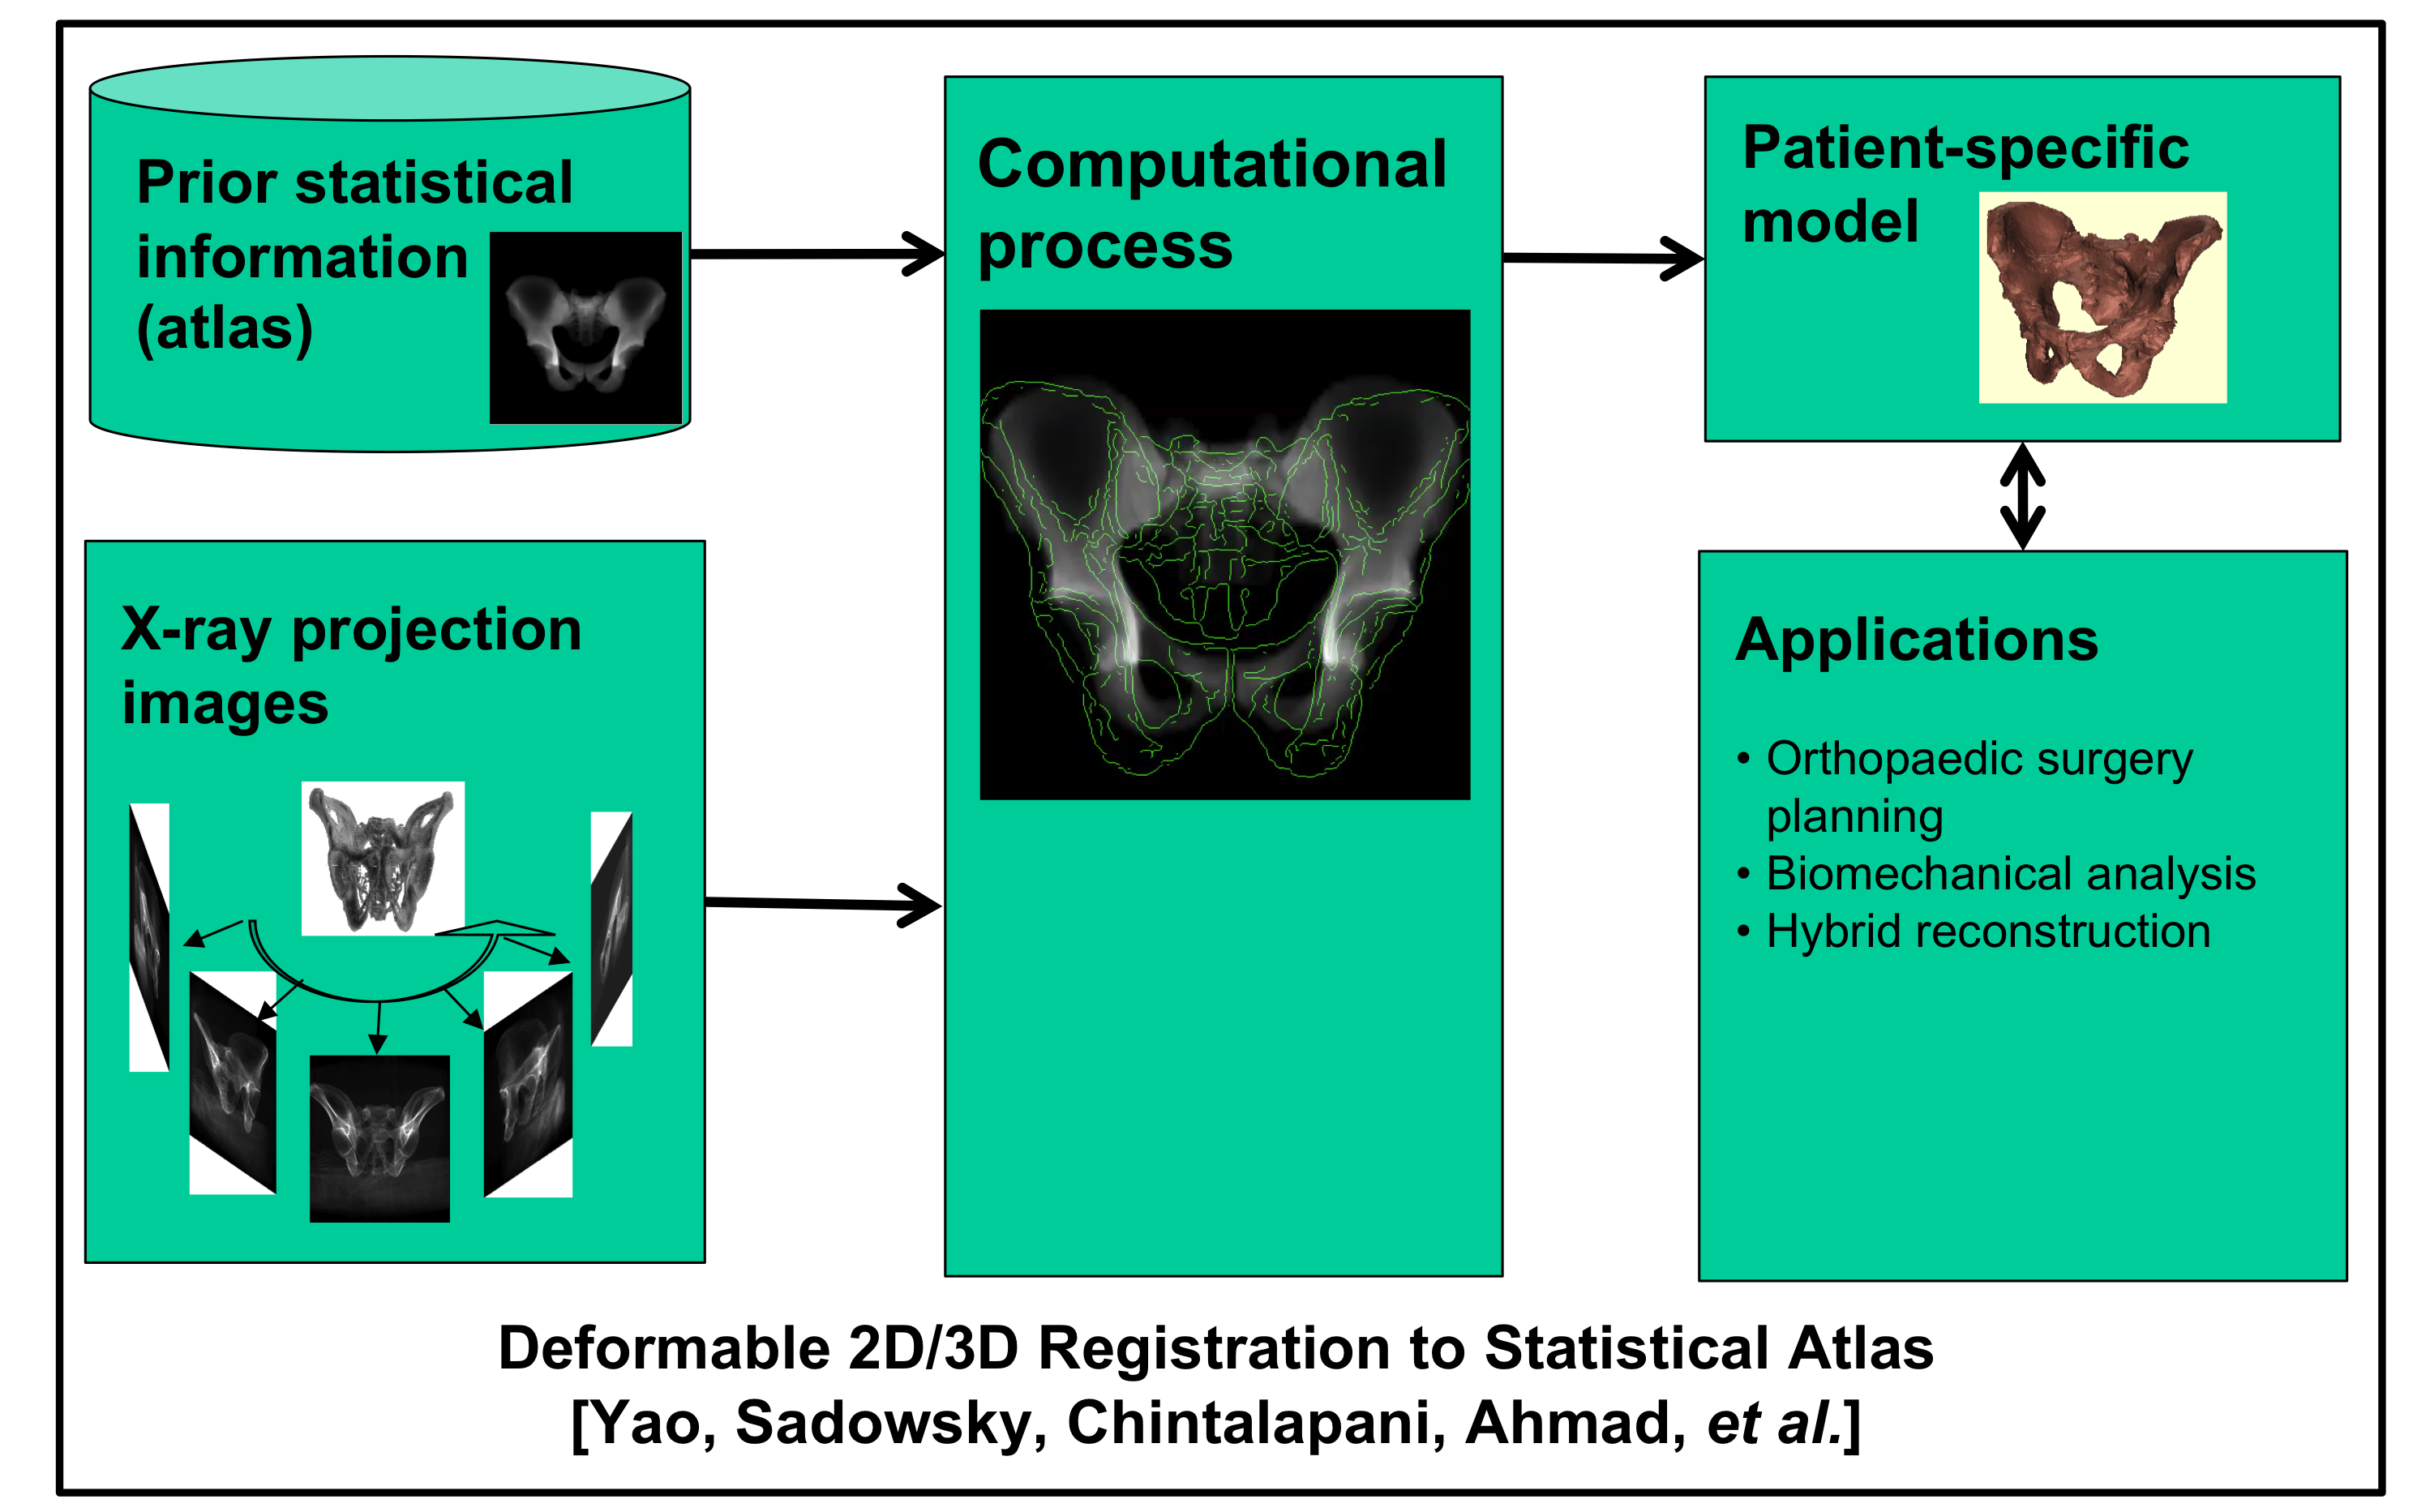 Deformable 2D-3D registration of statistical model of pelvis from sparse set of x-rays